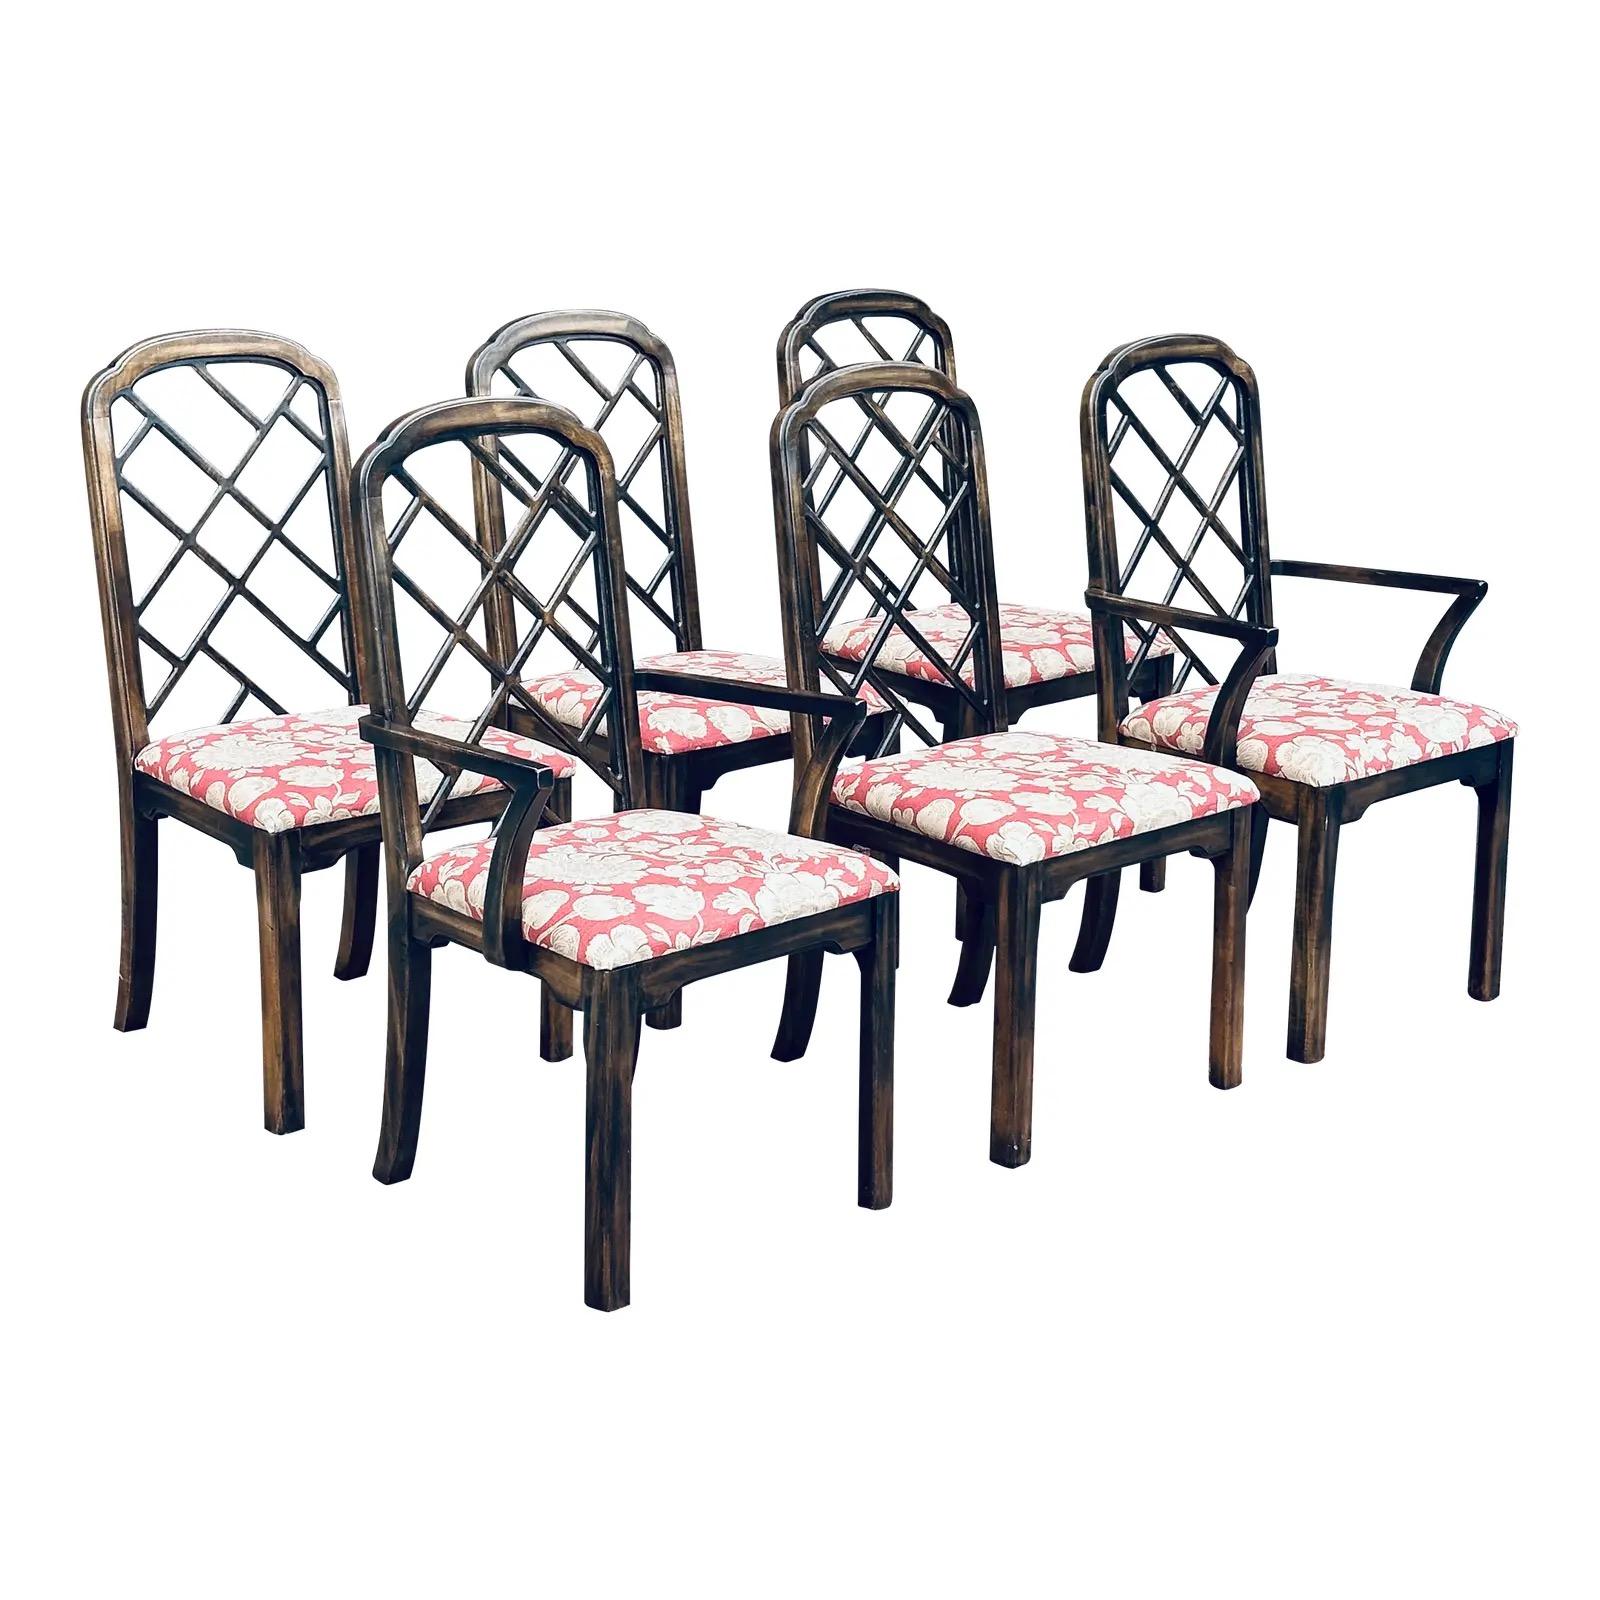 Vintage Thomasville Chinese Chippendale Fretwork Hollywood Regency Dining Chairs